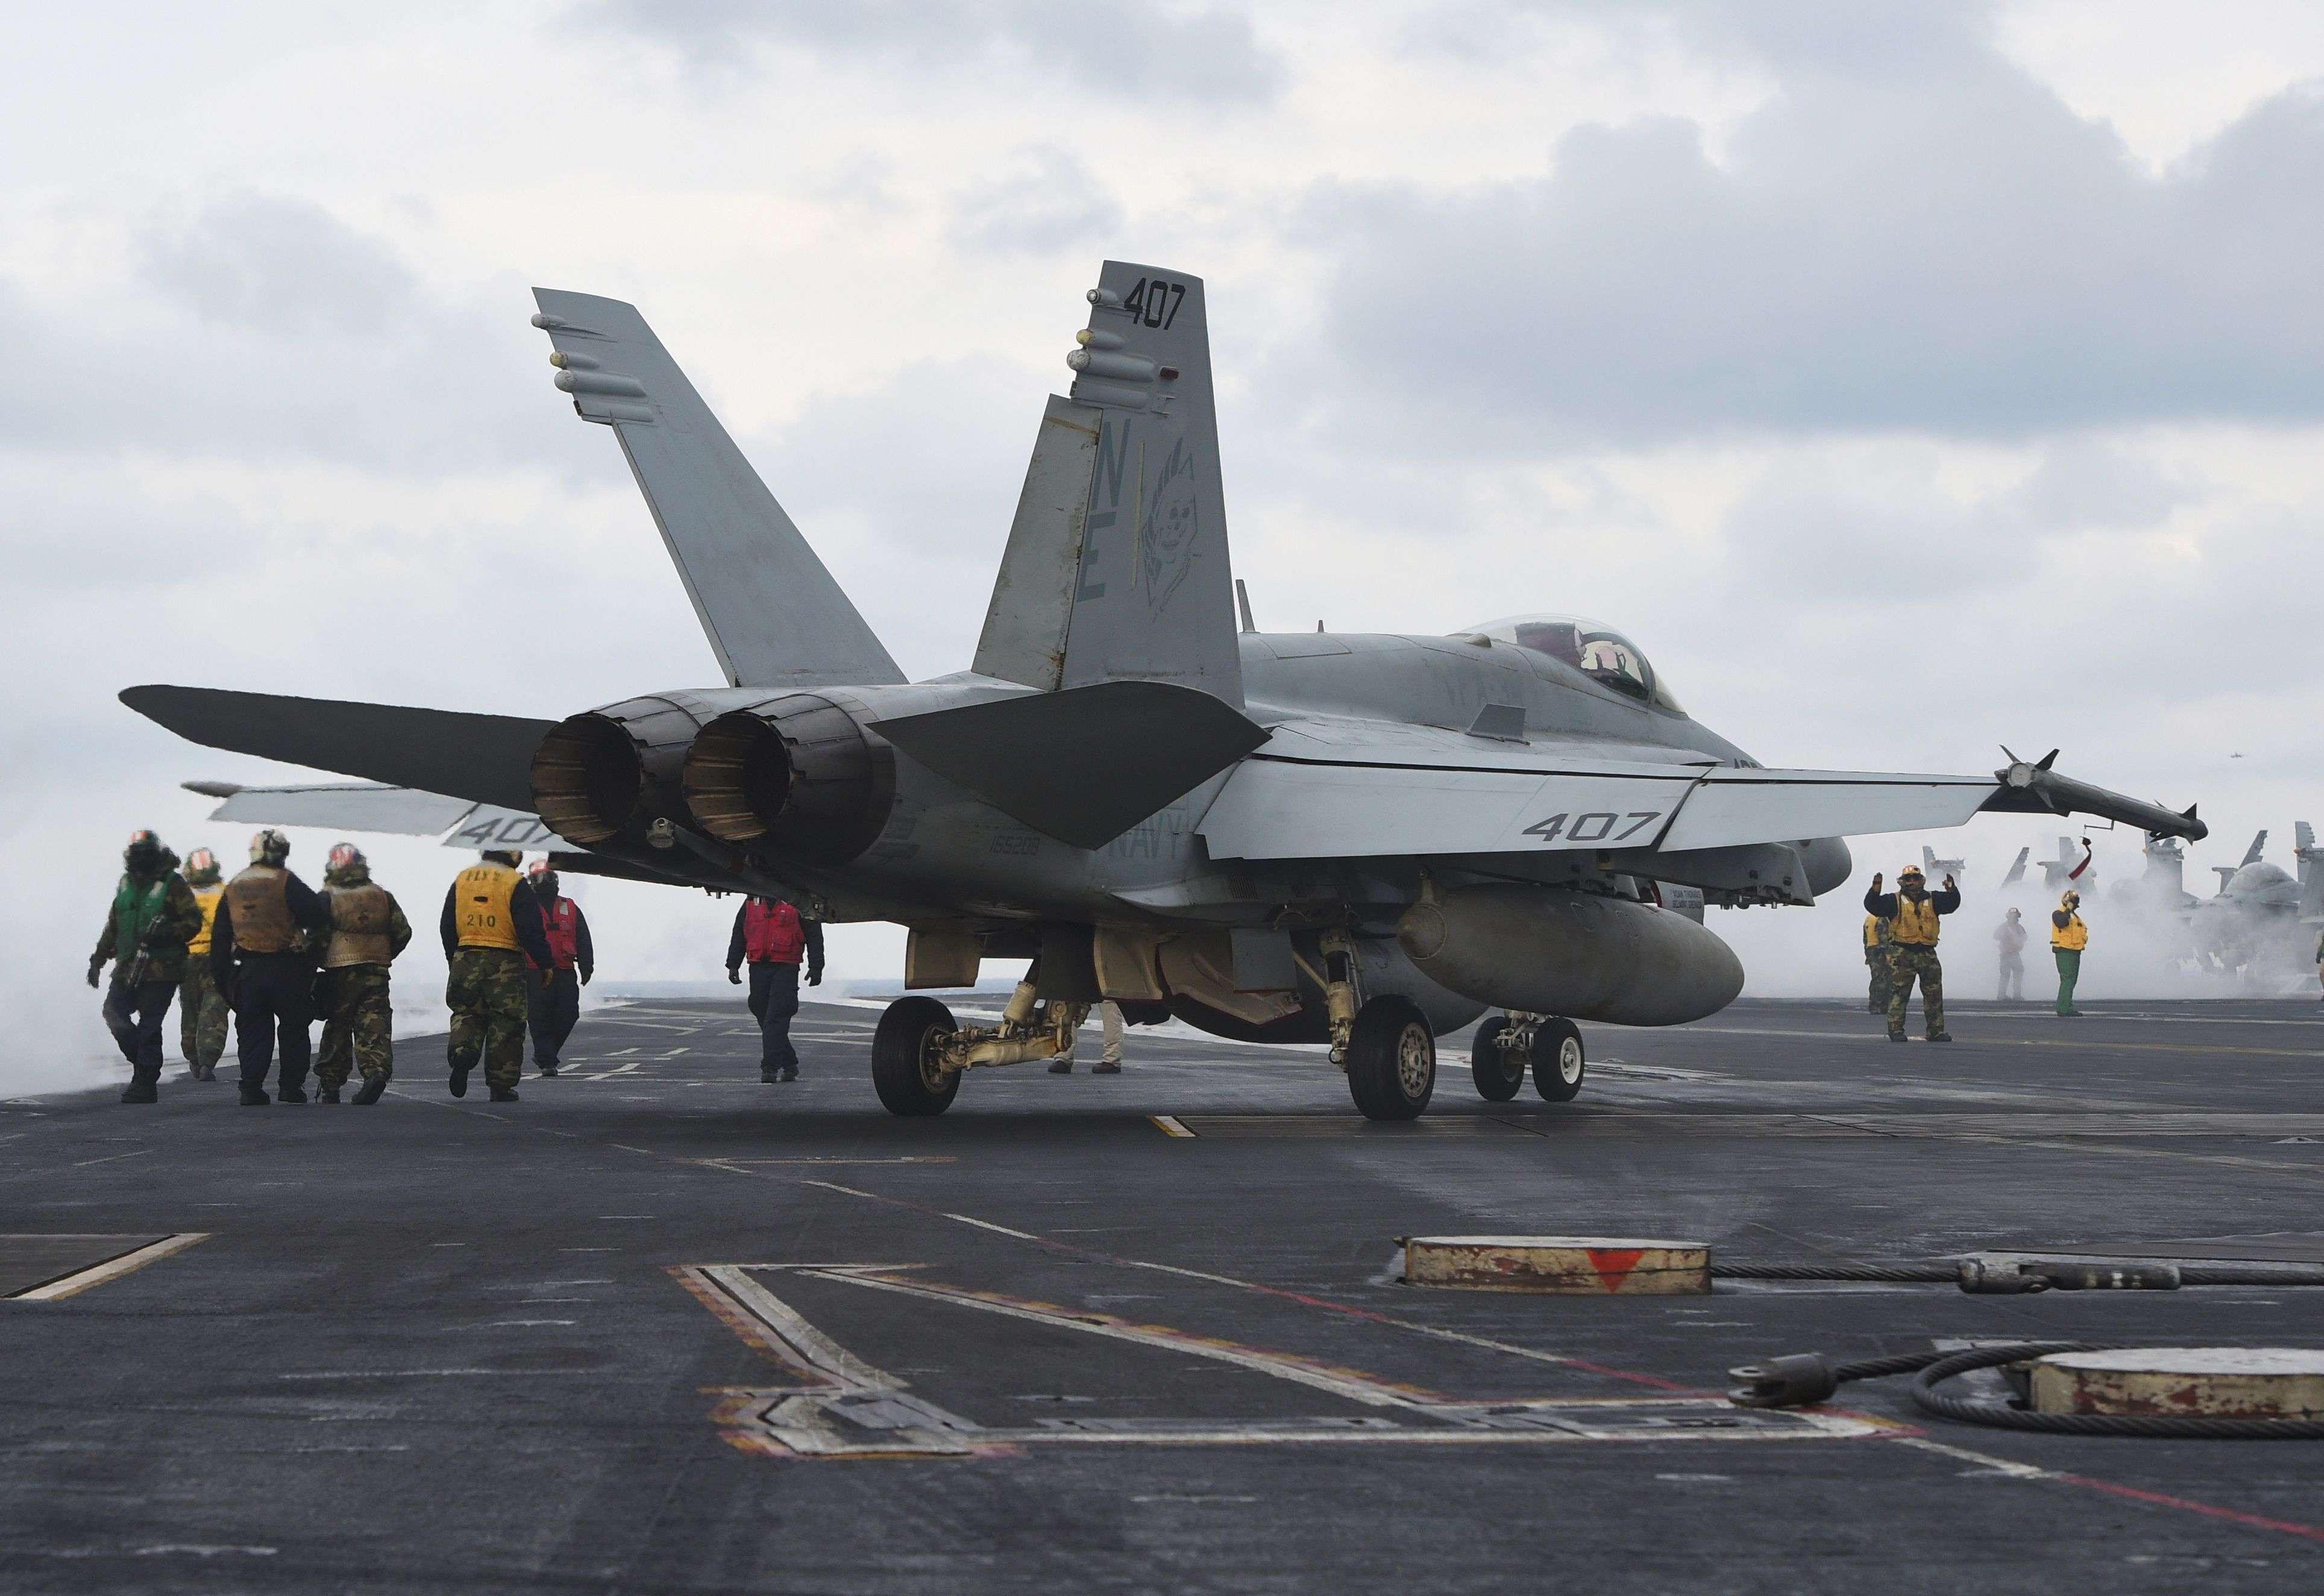 US Navy flight crew members stand near a single-seater F/A-18C Hornet fighter jet on the deck of the Nimitz-class aircraft carrier USS Carl Vinson. The nuclear-powered carrier arrived in South Korea on Wednesday to participate in an ongoing joint military exercise, the US navy said. Photo: AFP